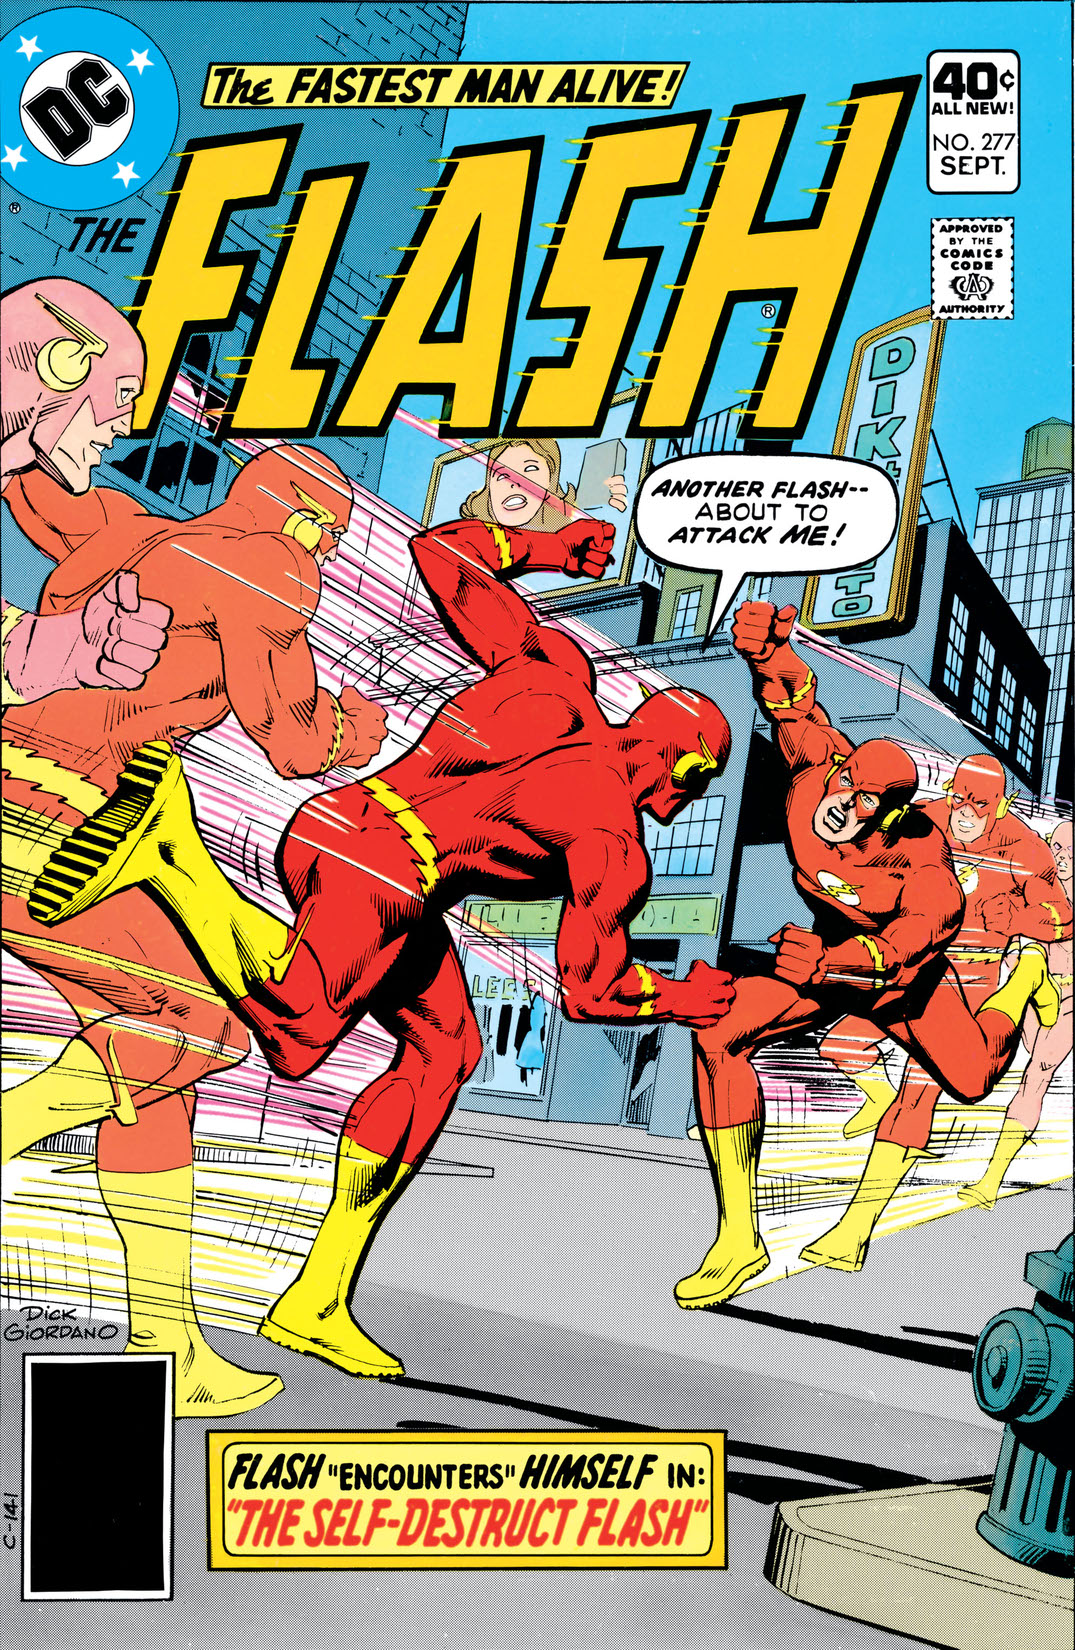 The Flash (1959-) #277 preview images